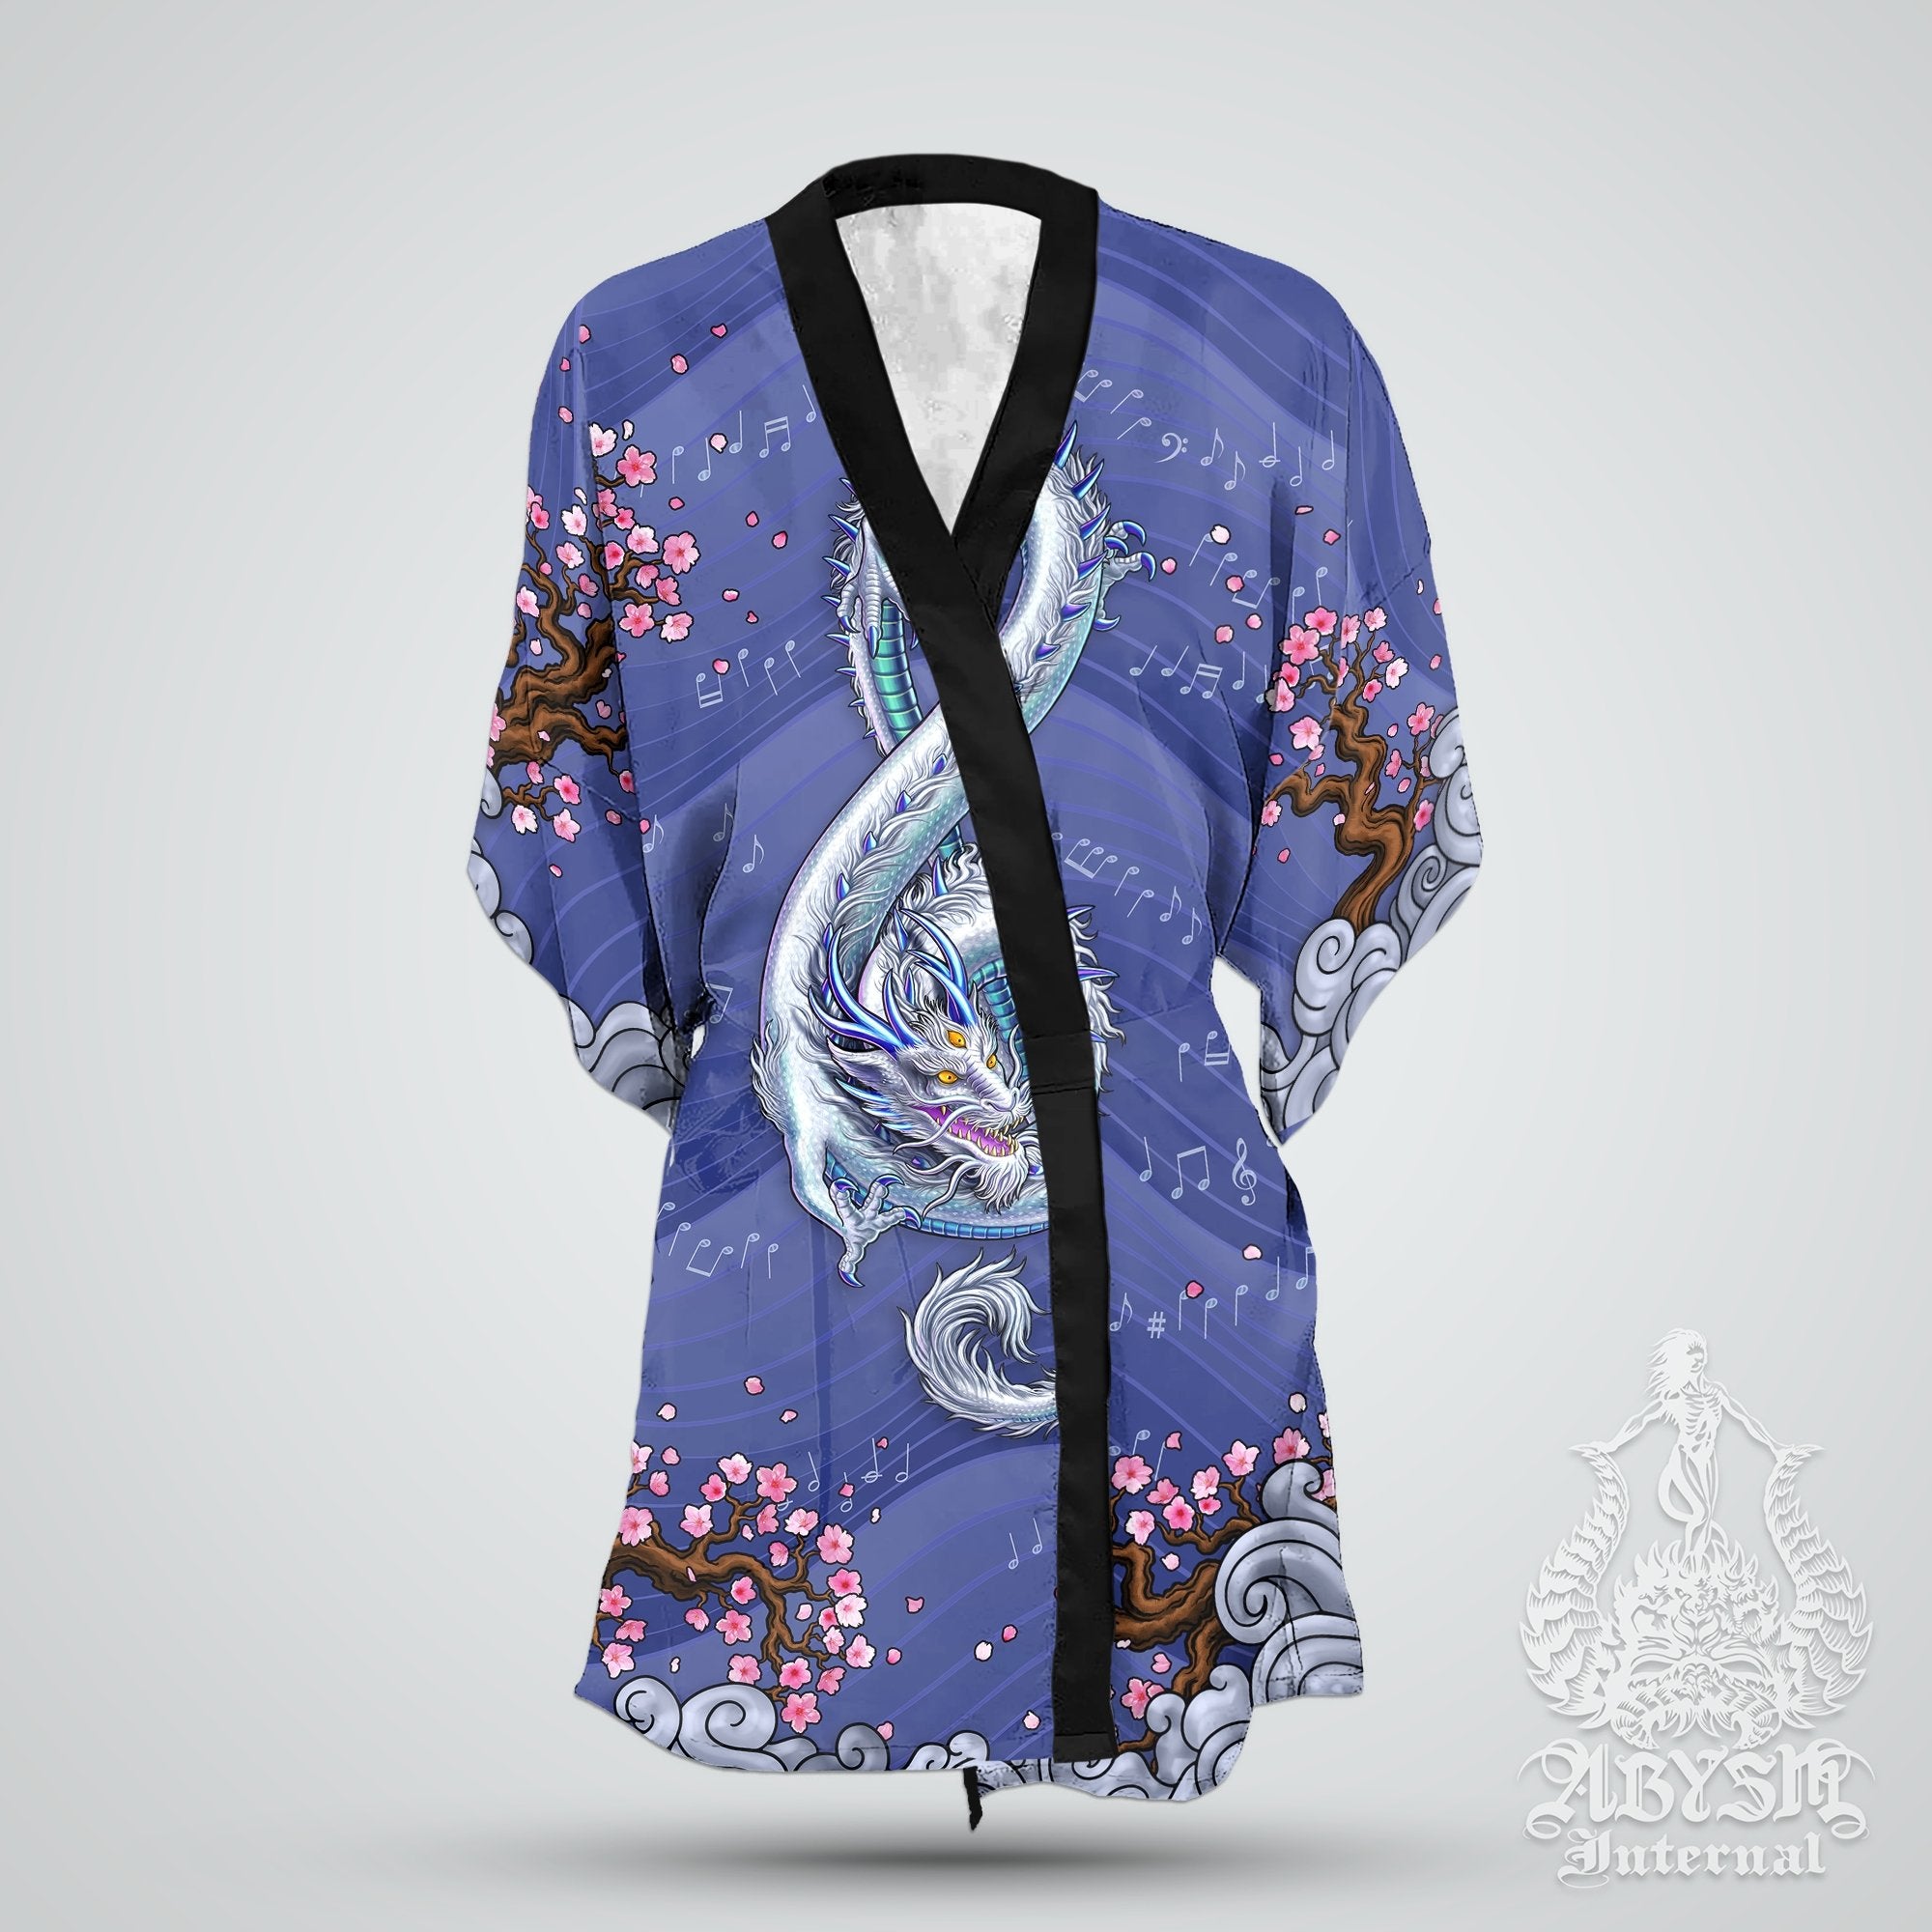 Music Cover Up, Beach Outfit, Party Kimono, Summer Festival Robe, Indie and Alternative Clothing, Unisex - Dragon, Blue - Abysm Internal